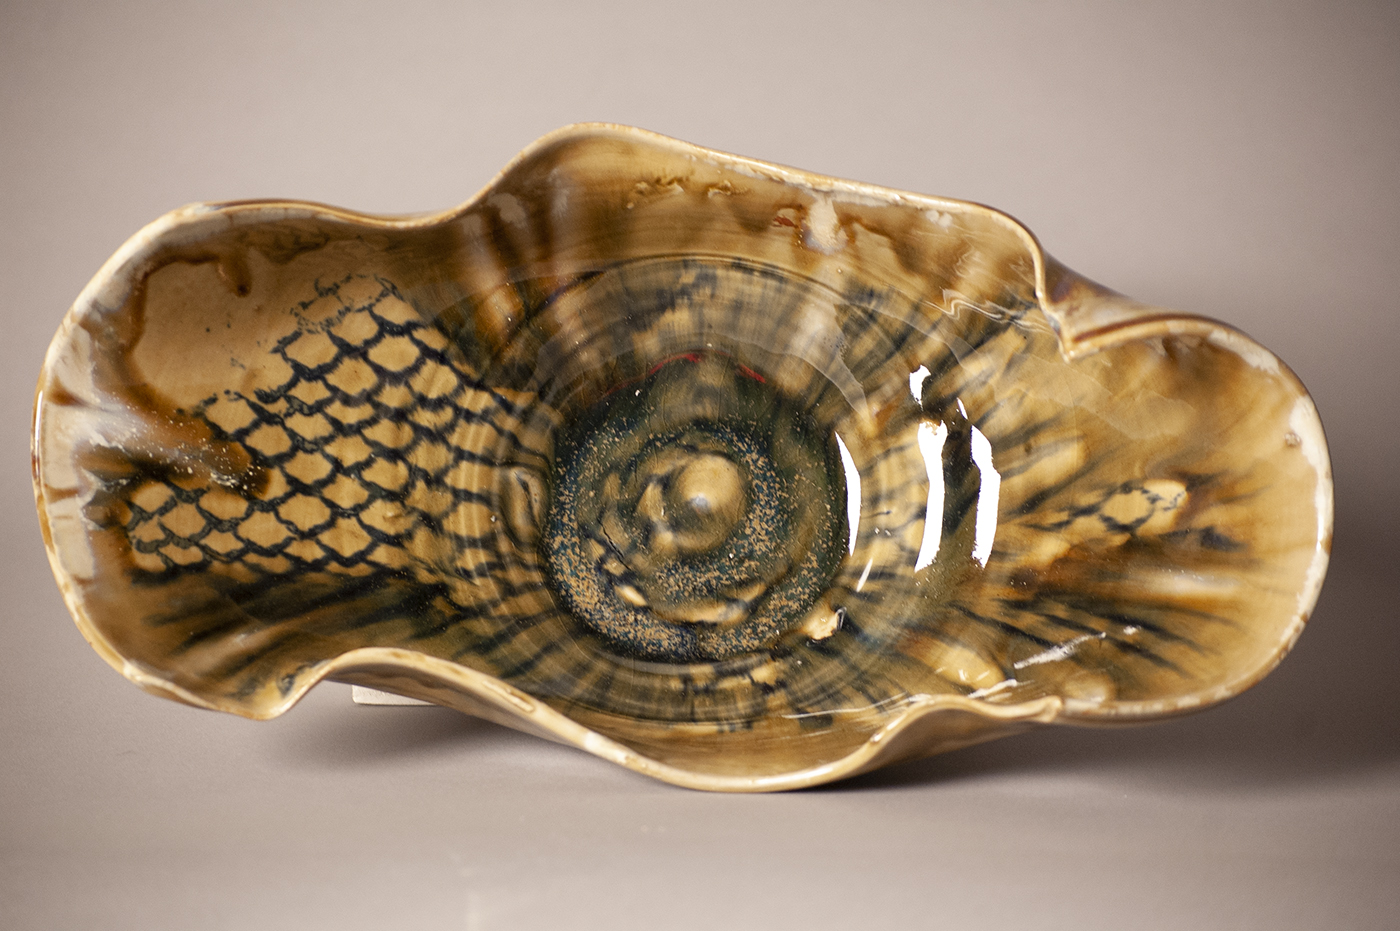 Amber green ceramic bowl with blue scale pattern and curling edge. 